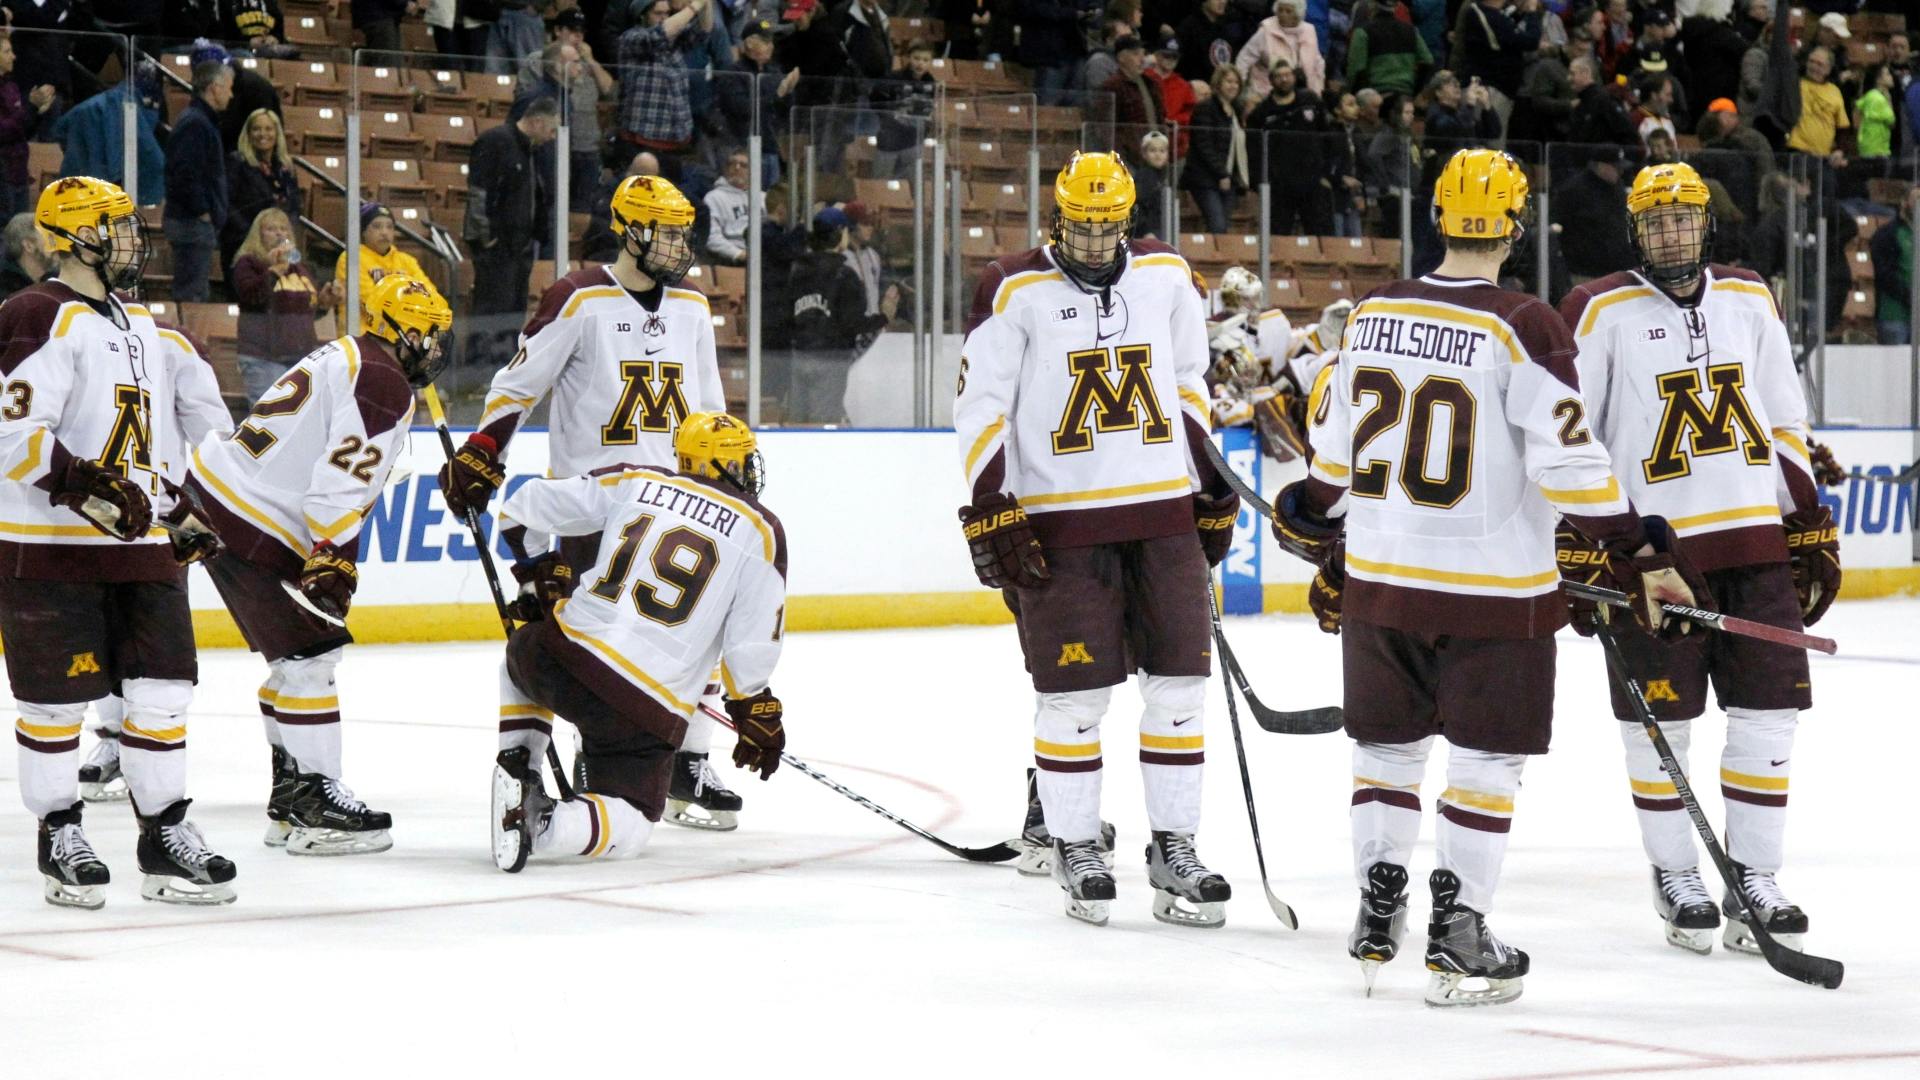 Gophers coach Don Lucia gives his thoughts on the Gophers' 3-2 loss to Notre Dame on Saturday in the NCAA hockey tournament.